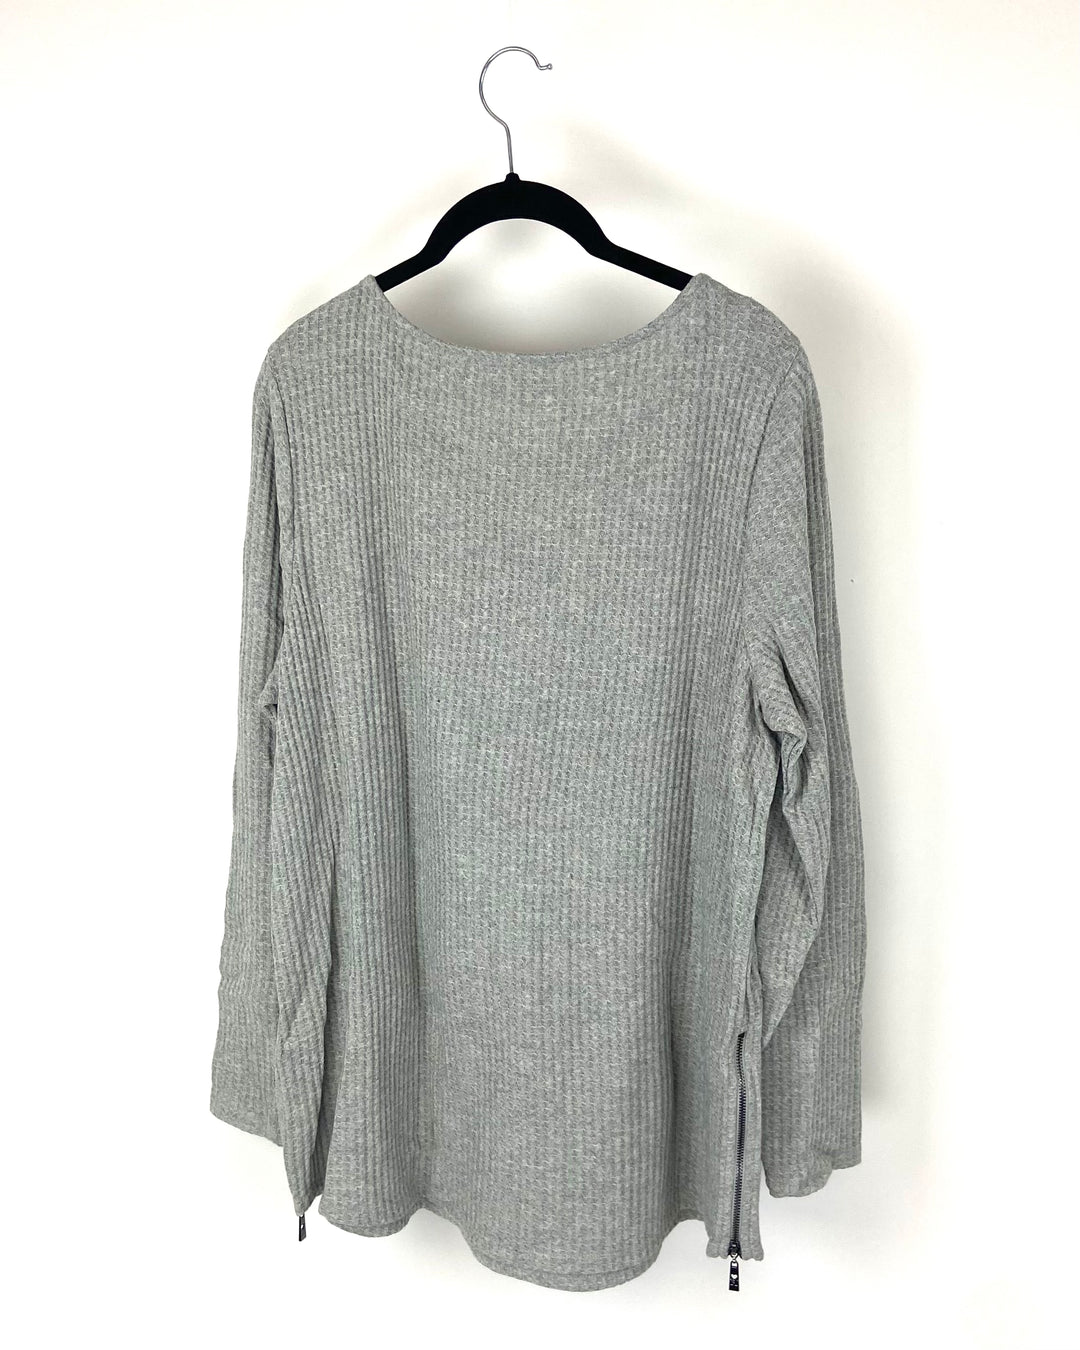 Gray Zipper Long Sleeve Top - Large/Extra Large